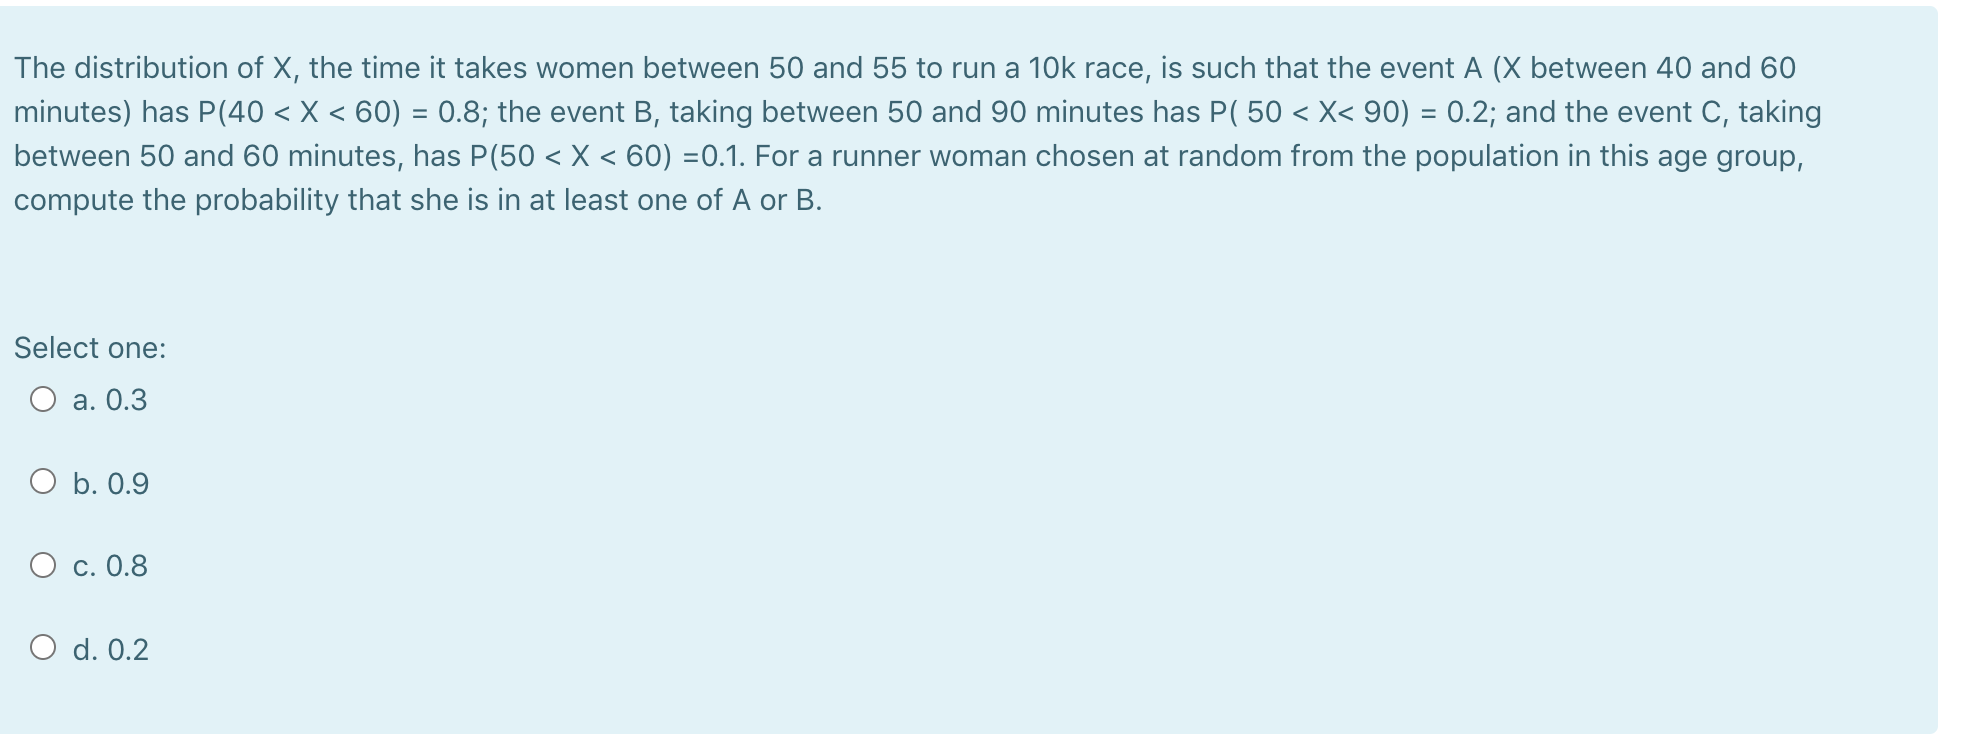 The distribution of X, the time it takes women between 50 and 55 to run a 10k race, is such that the event A (X between 40 and 60
minutes) has P(40 < X < 60) = 0.8; the event B, taking between 50 and 90 minutes has P( 50 < X< 90) = 0.2; and the event C, taking
between 50 and 60 minutes, has P(50 < X < 60) =0.1. For a runner woman chosen at random from the population in this age group,
compute the probability that she is in at least one of A or B.
Select one:
О а. 0.3
O b. 0.9
О с. 0.8
O d. 0.2
